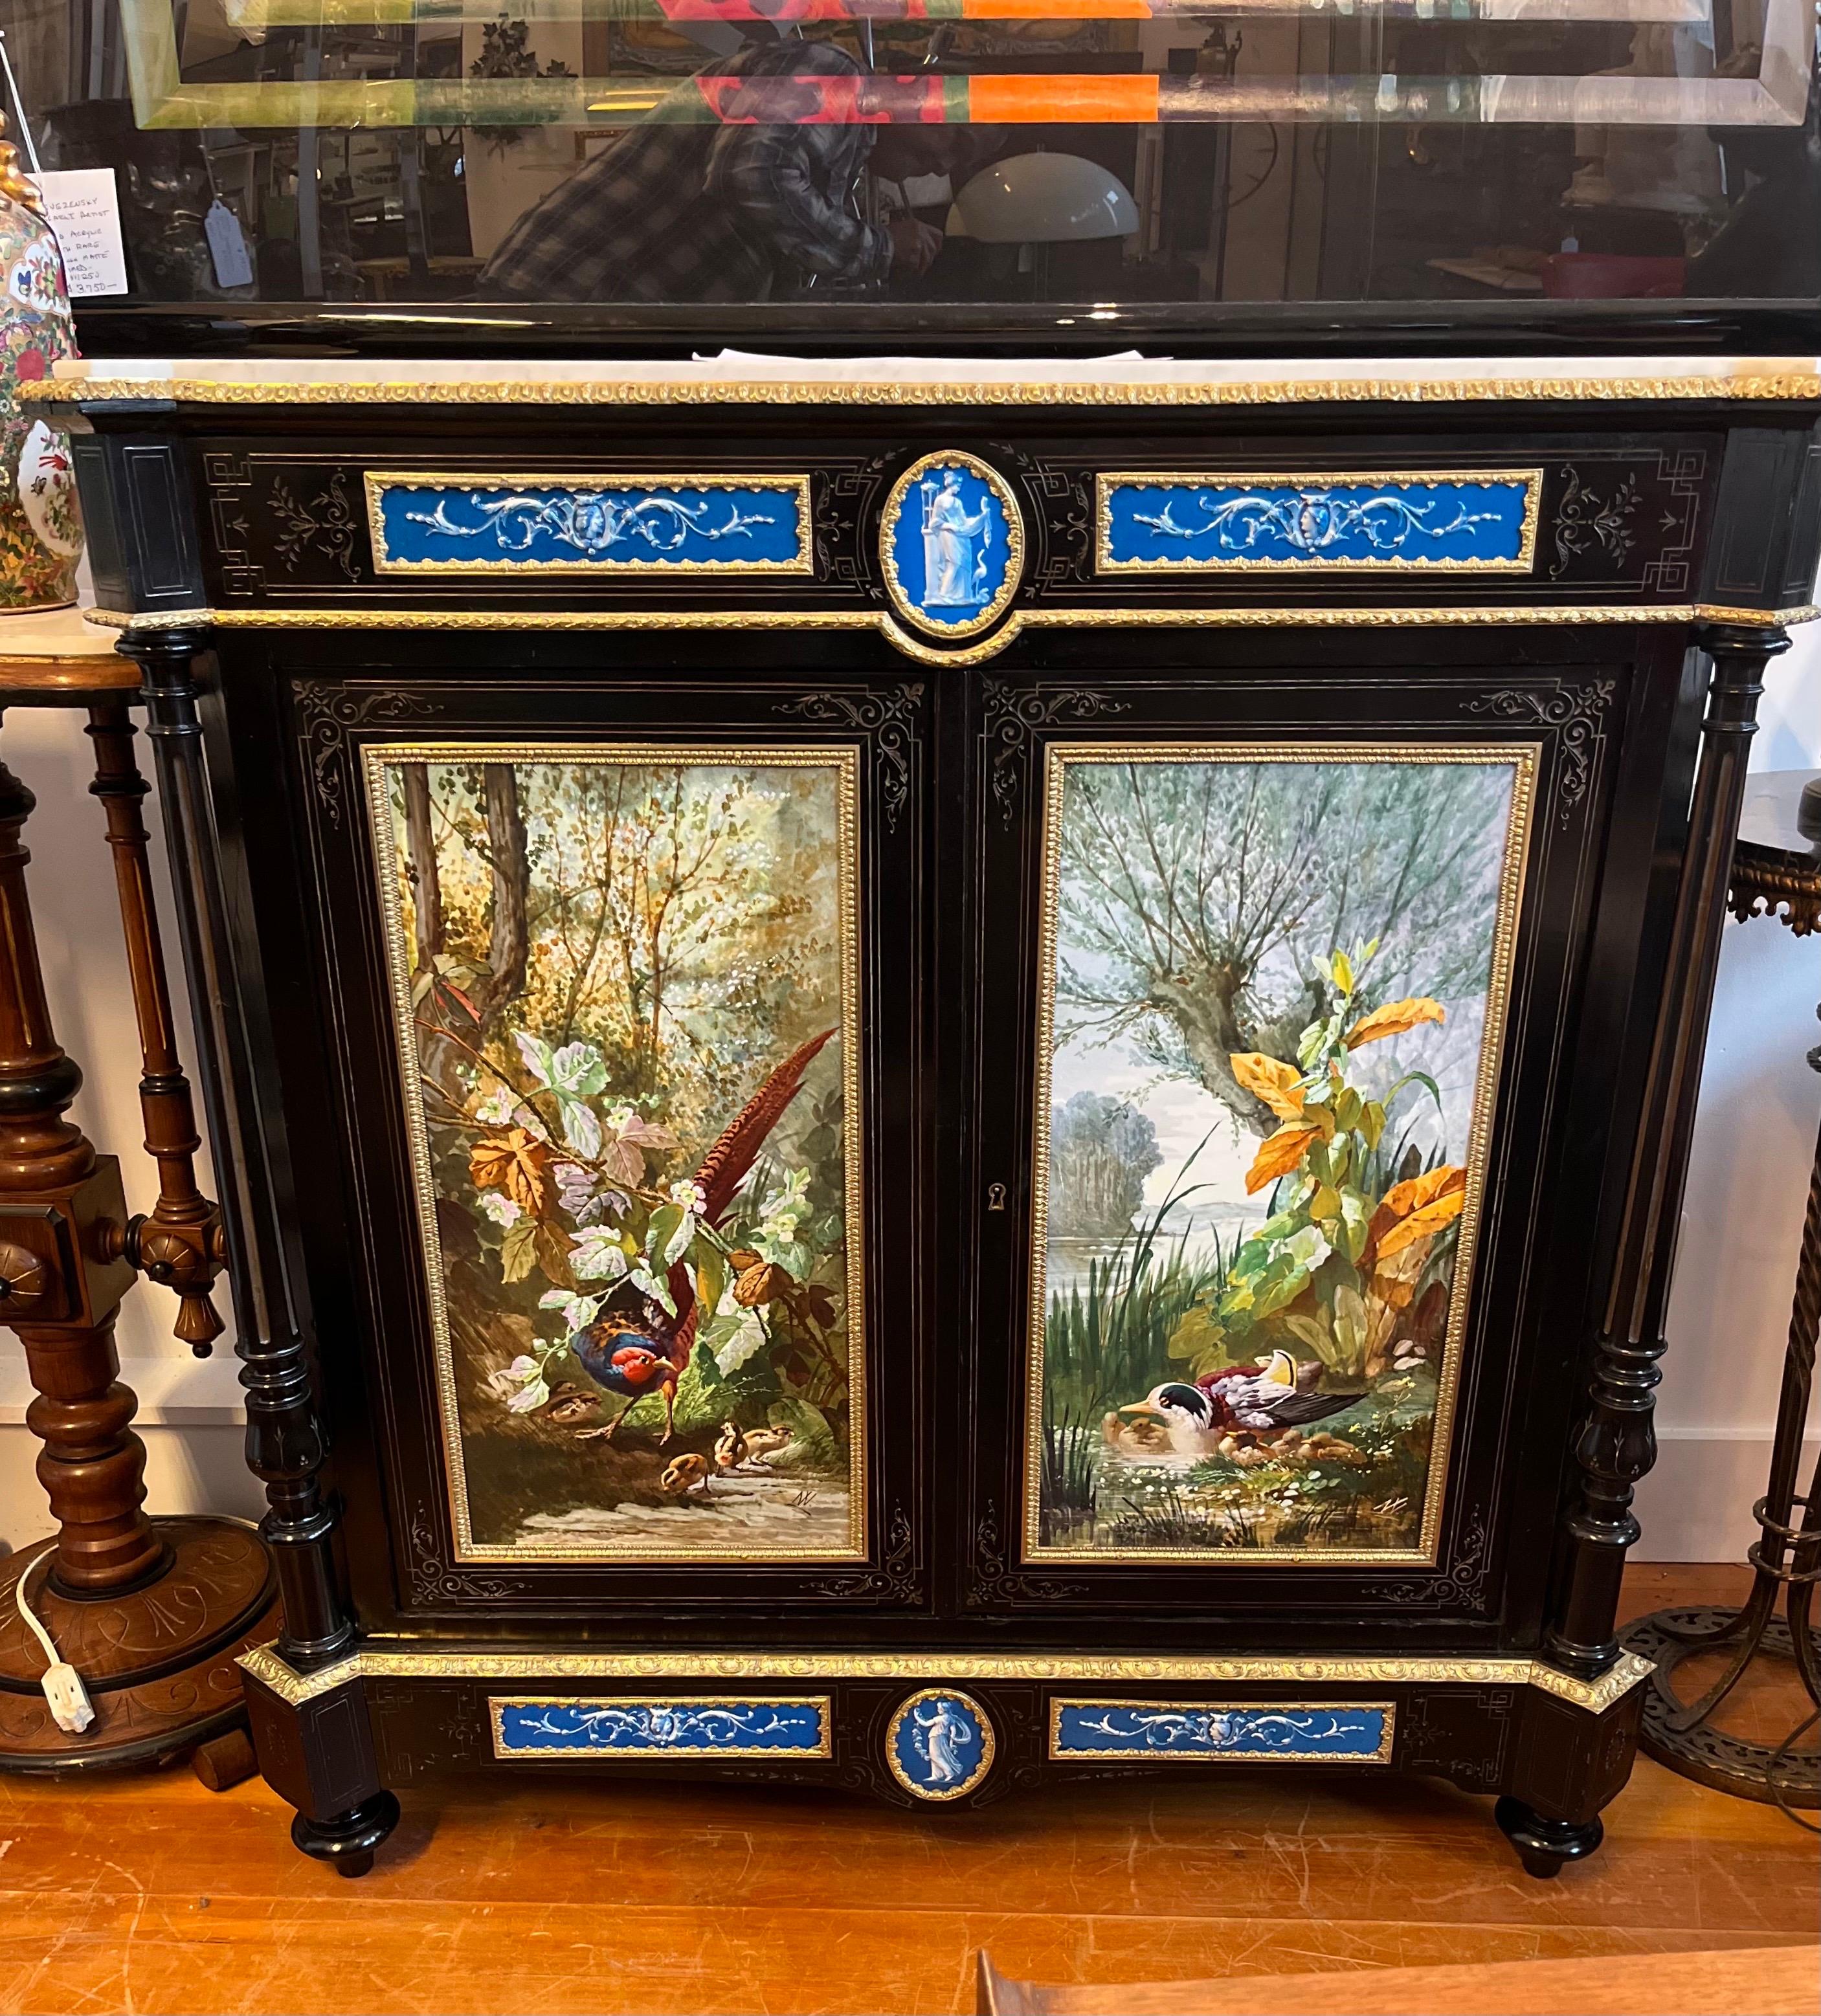 An Exceptional Napoleon III cabinet with Sevres porcelain hand painted plaques by Narcisse Vivien. The cabinet by Famed architect cabinet maker and interior designer, Leon Marcotte.  This piece was at the 1878 Paris Exposition and was featured on